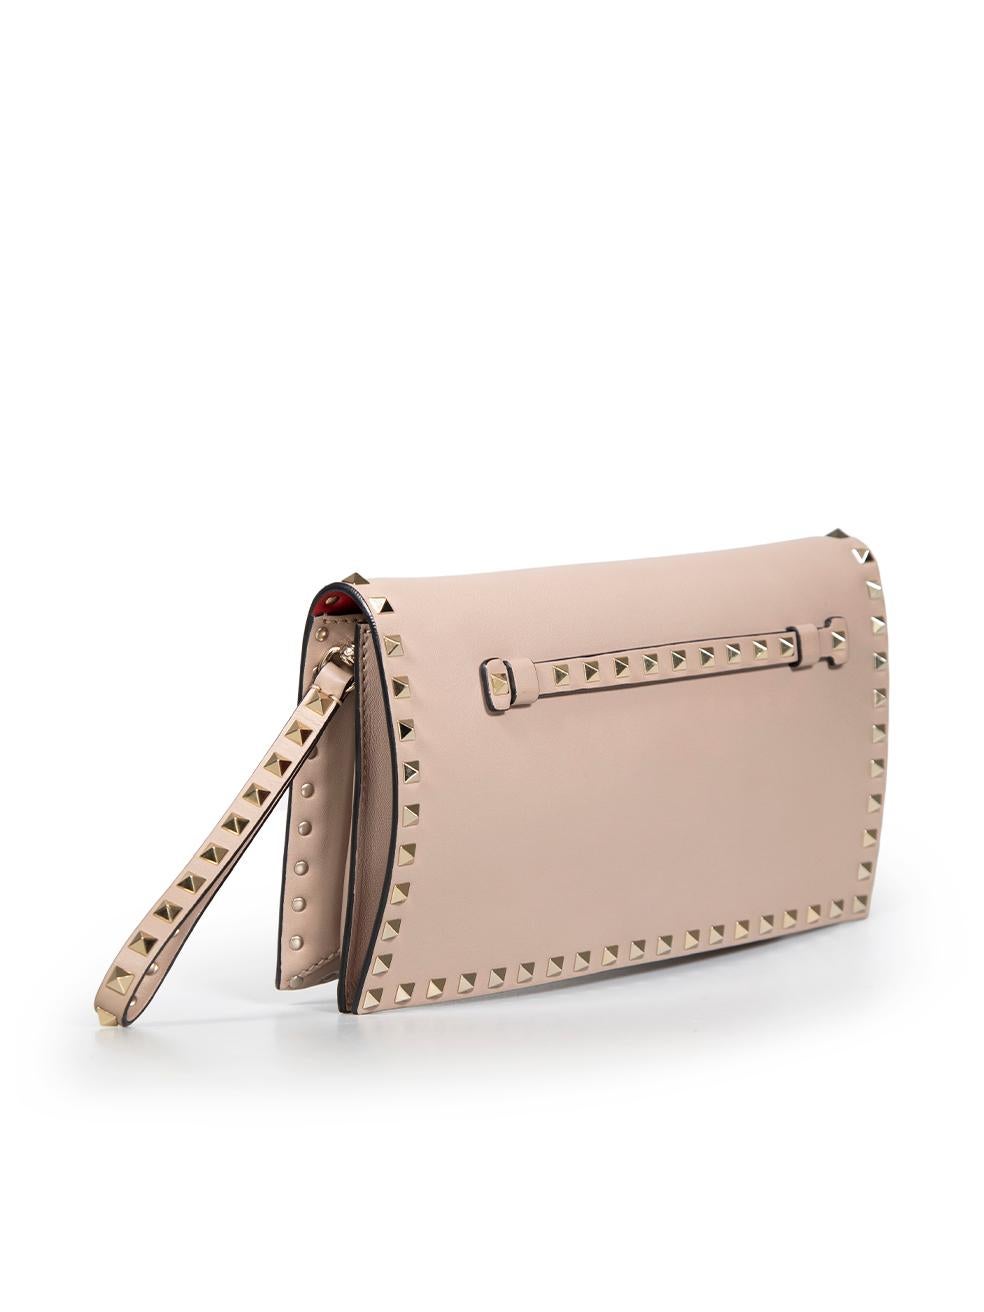 CONDITION is Very good. Hardly any visible wear to clutch is evident on this used Valentino designer resale item.
 
 
 
 Details
 
 
 Beige
 
 Leather
 
 Medium clutch
 
 Rockstud accent
 
 1x Wrislet handle
 
 1x Front slide handle
 
 Silver tone